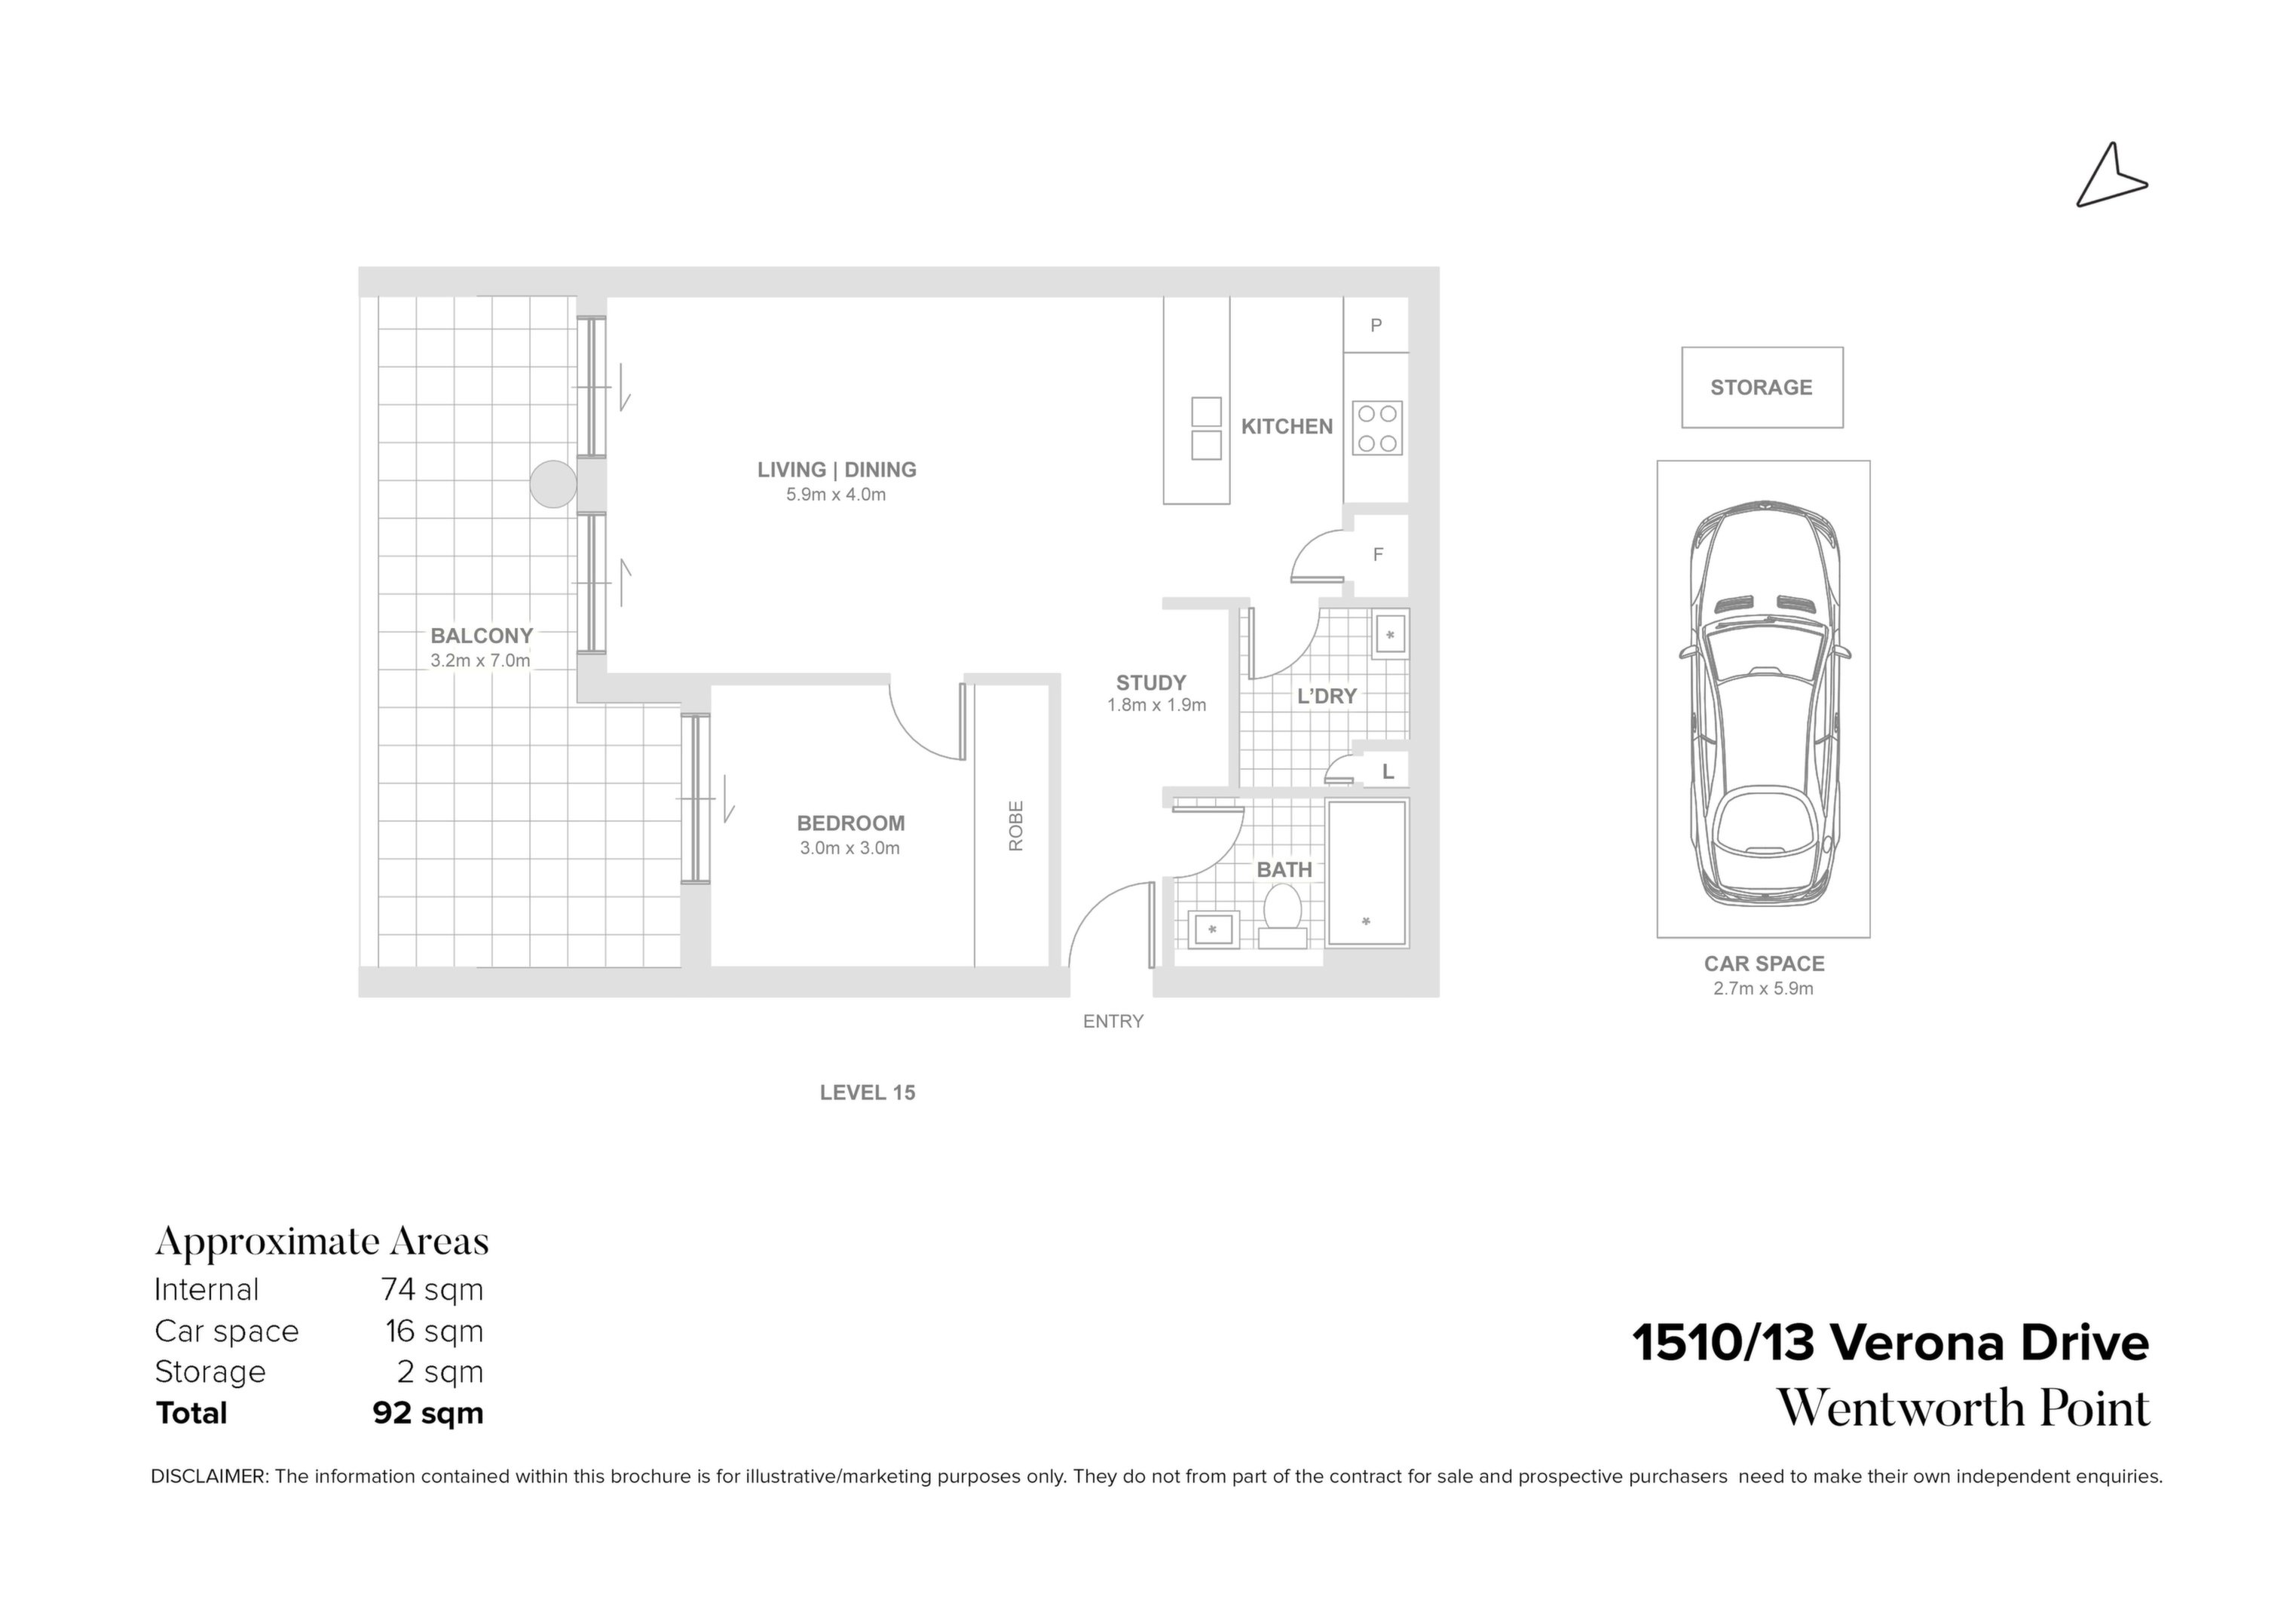 1510/13 Verona Drive, Wentworth Point Sold by Chidiac Realty - floorplan